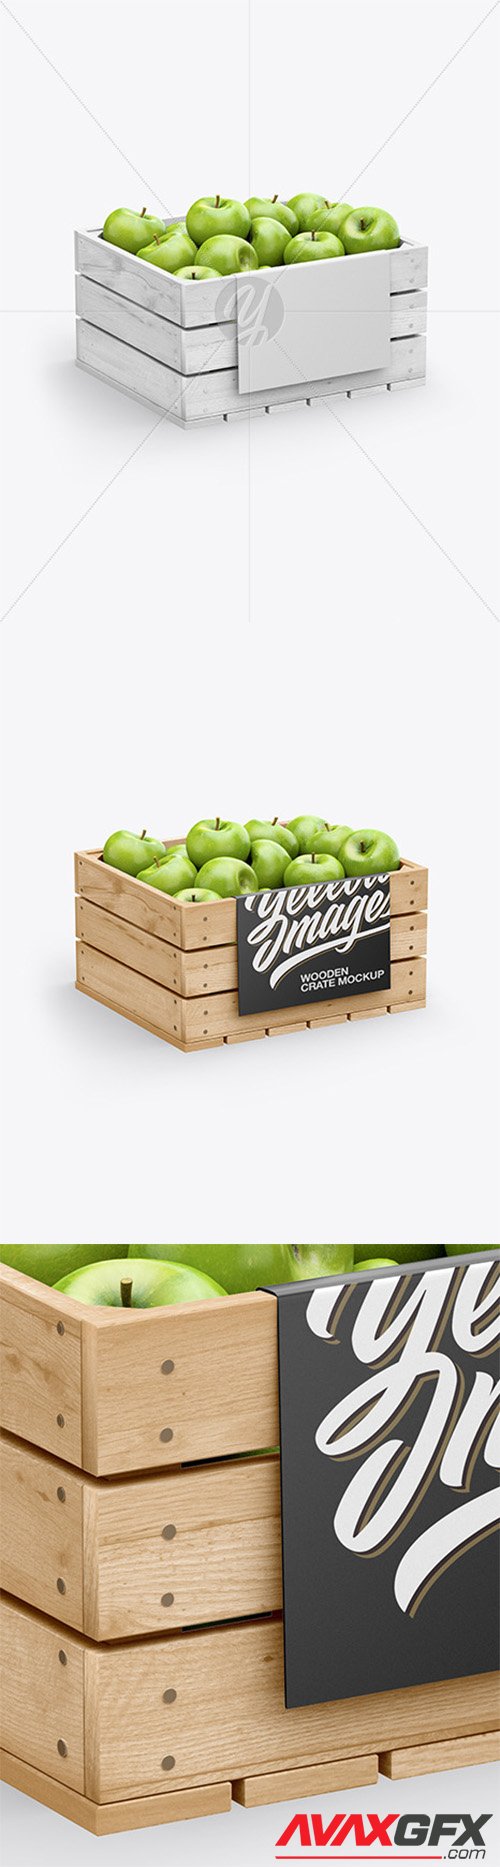 Crate with Green Apples Mockup 78464 TIF